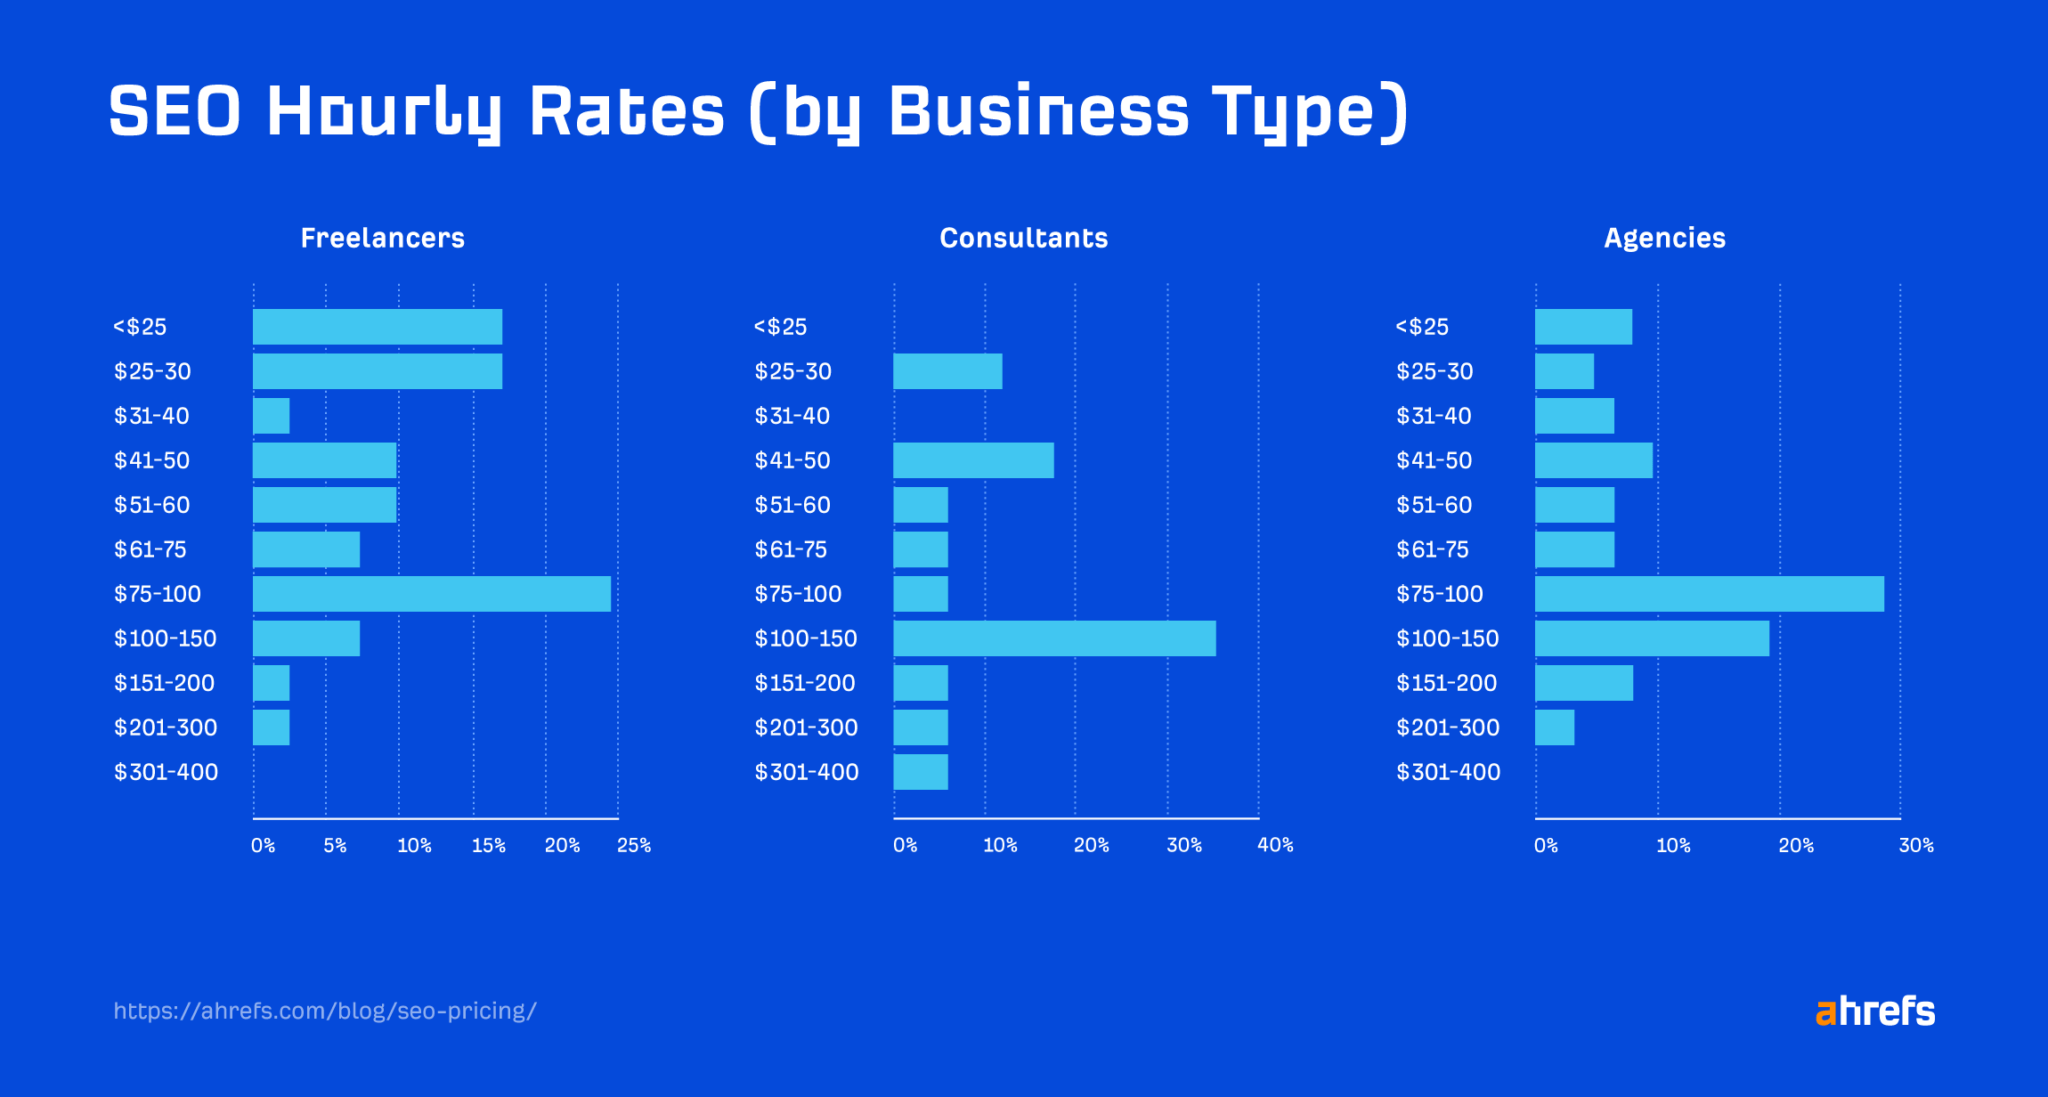 Image showing common SEO hourly rates by business type